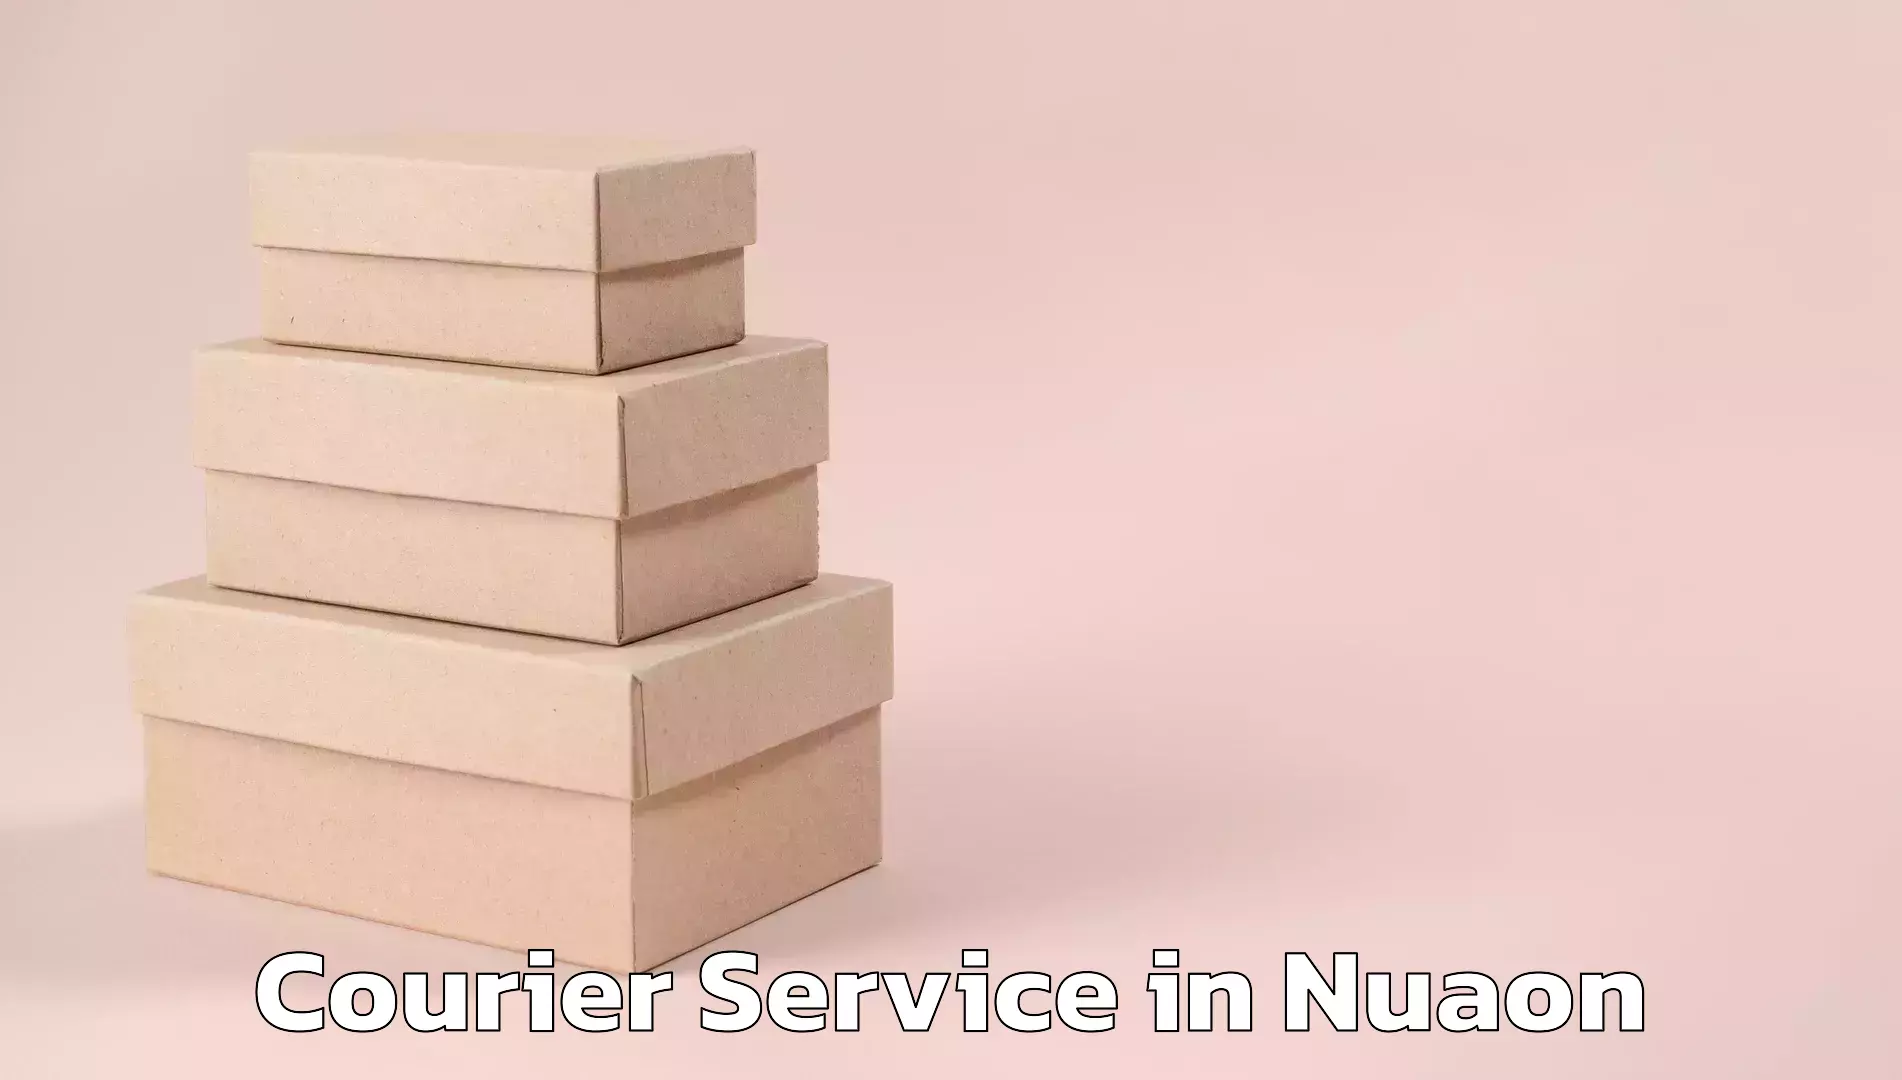 Parcel handling and care in Nuaon